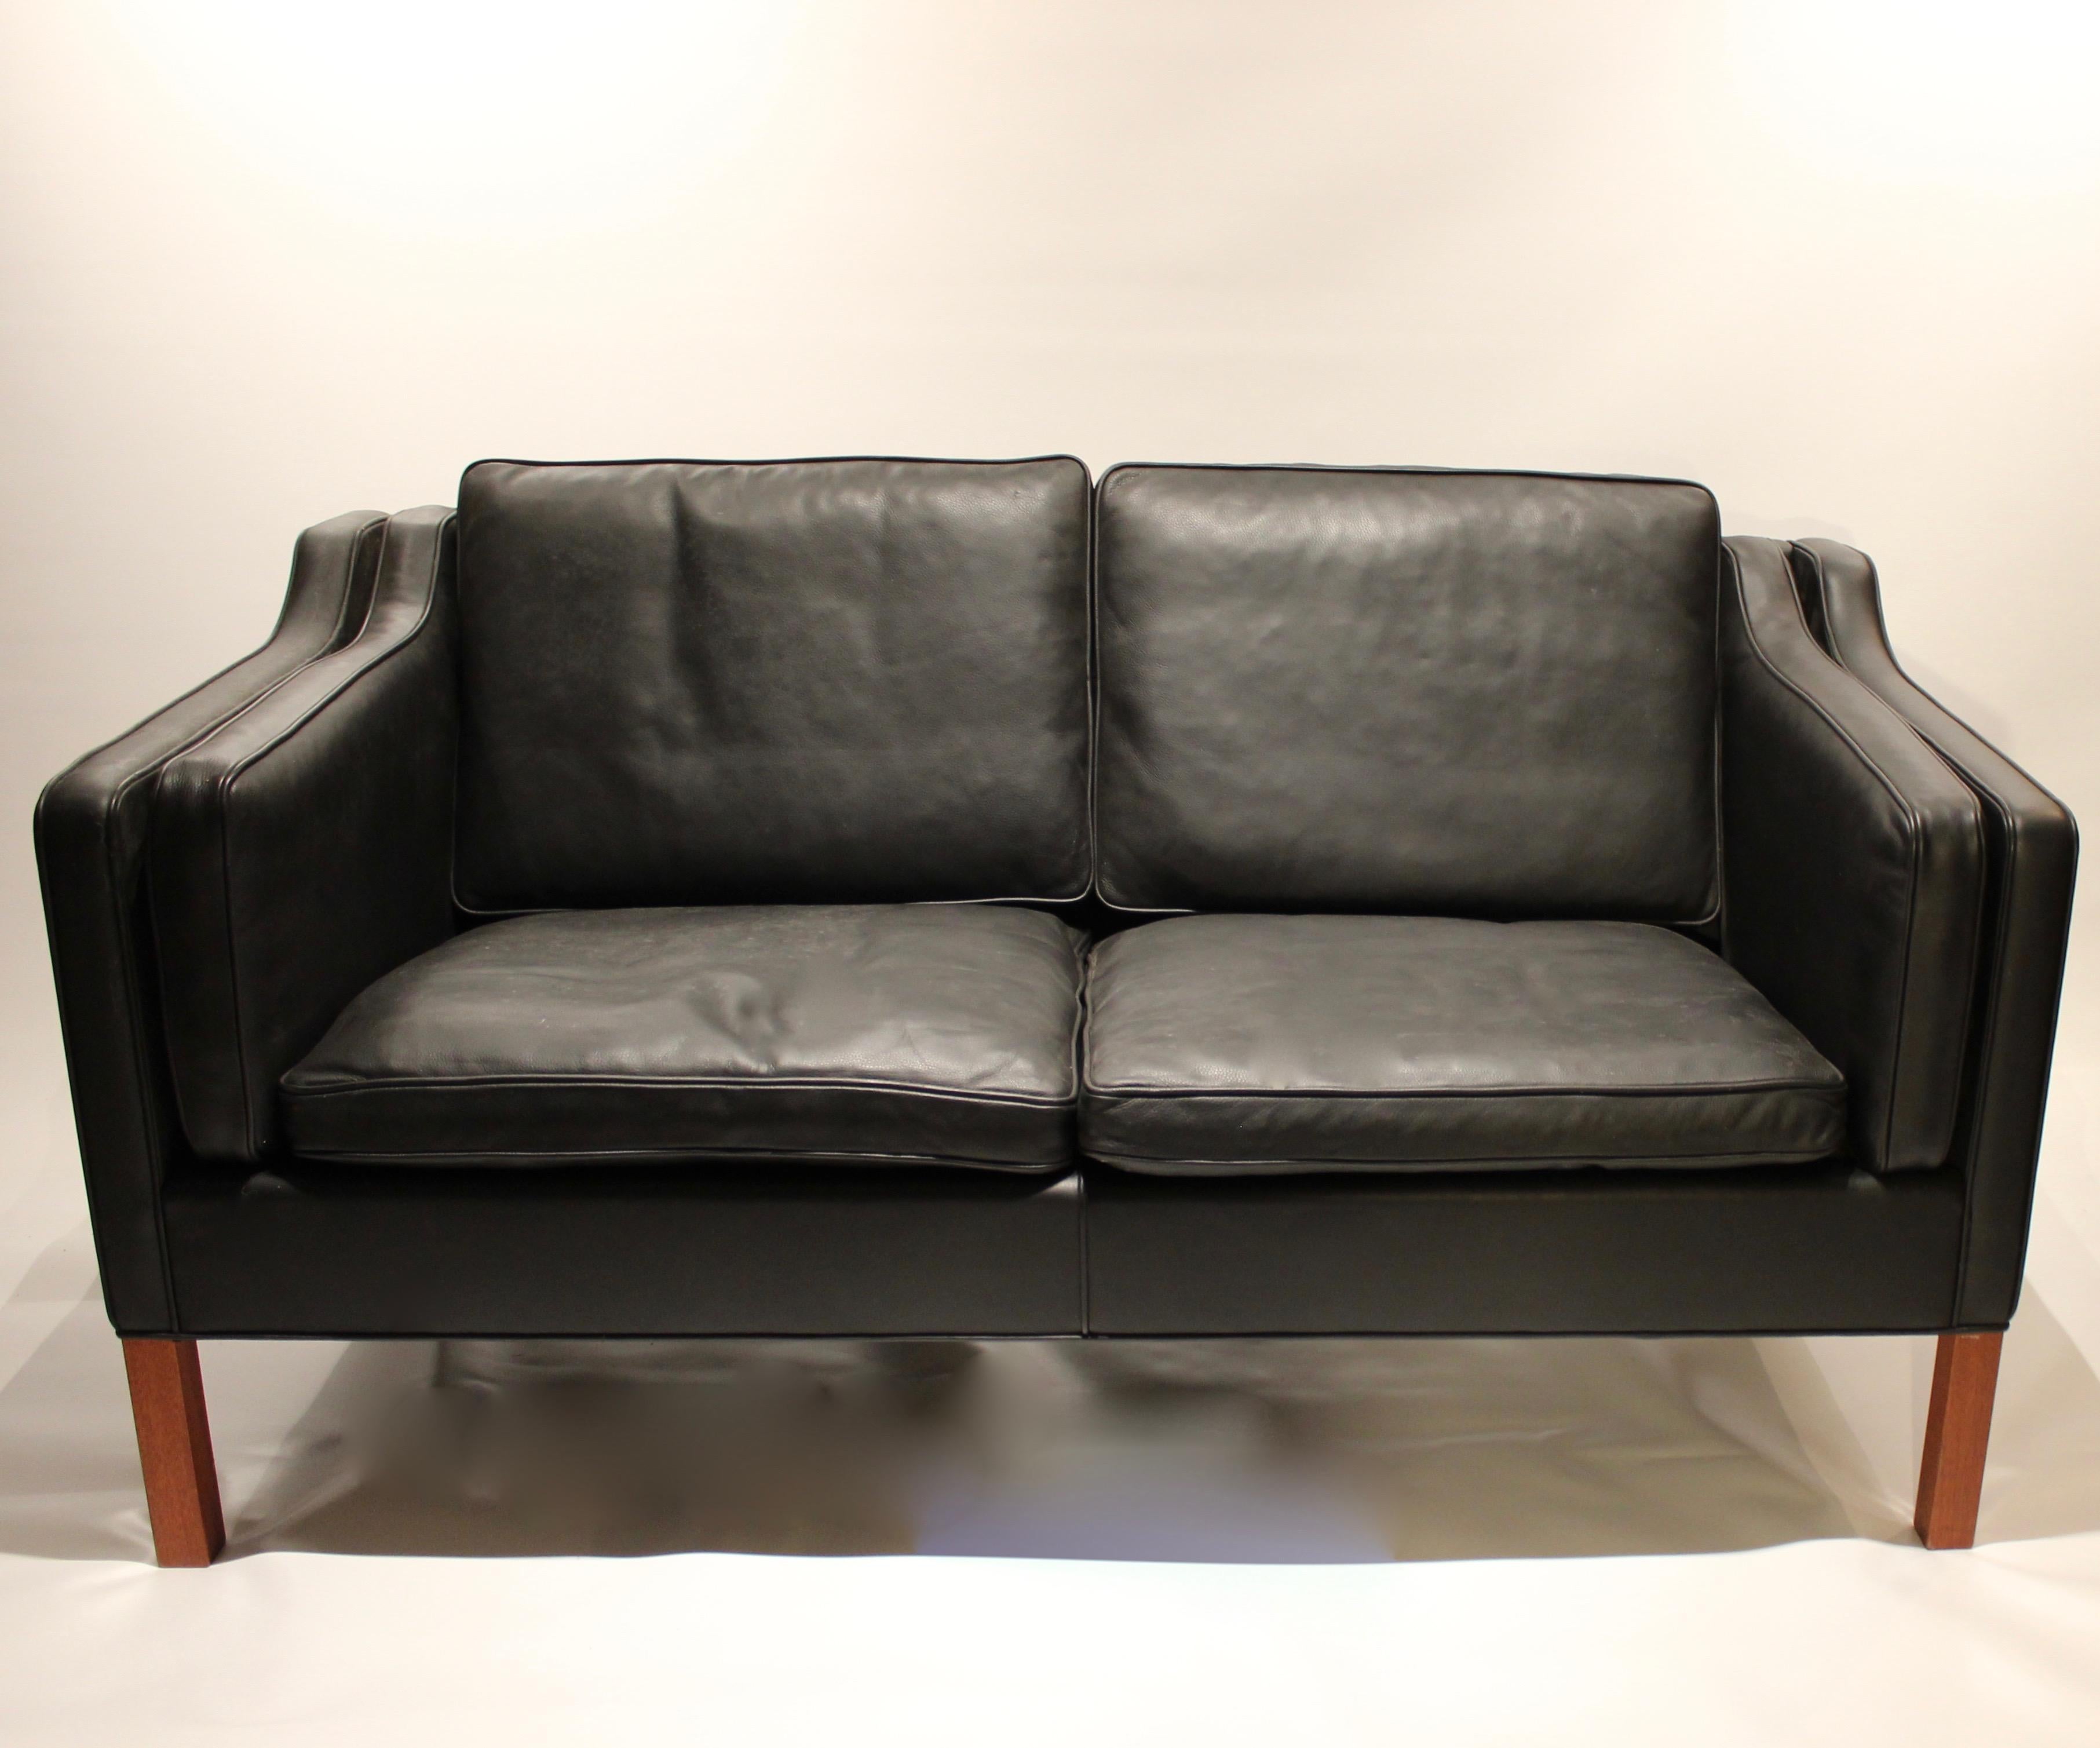 Black leather 2-seat sofa with legs of mahogany, model 2212, designed by Børge Mogensen in 1962 and manufactured by Fredericia furniture in the 1980s. The sofa is in great vintage condition and we currently have two in stock.